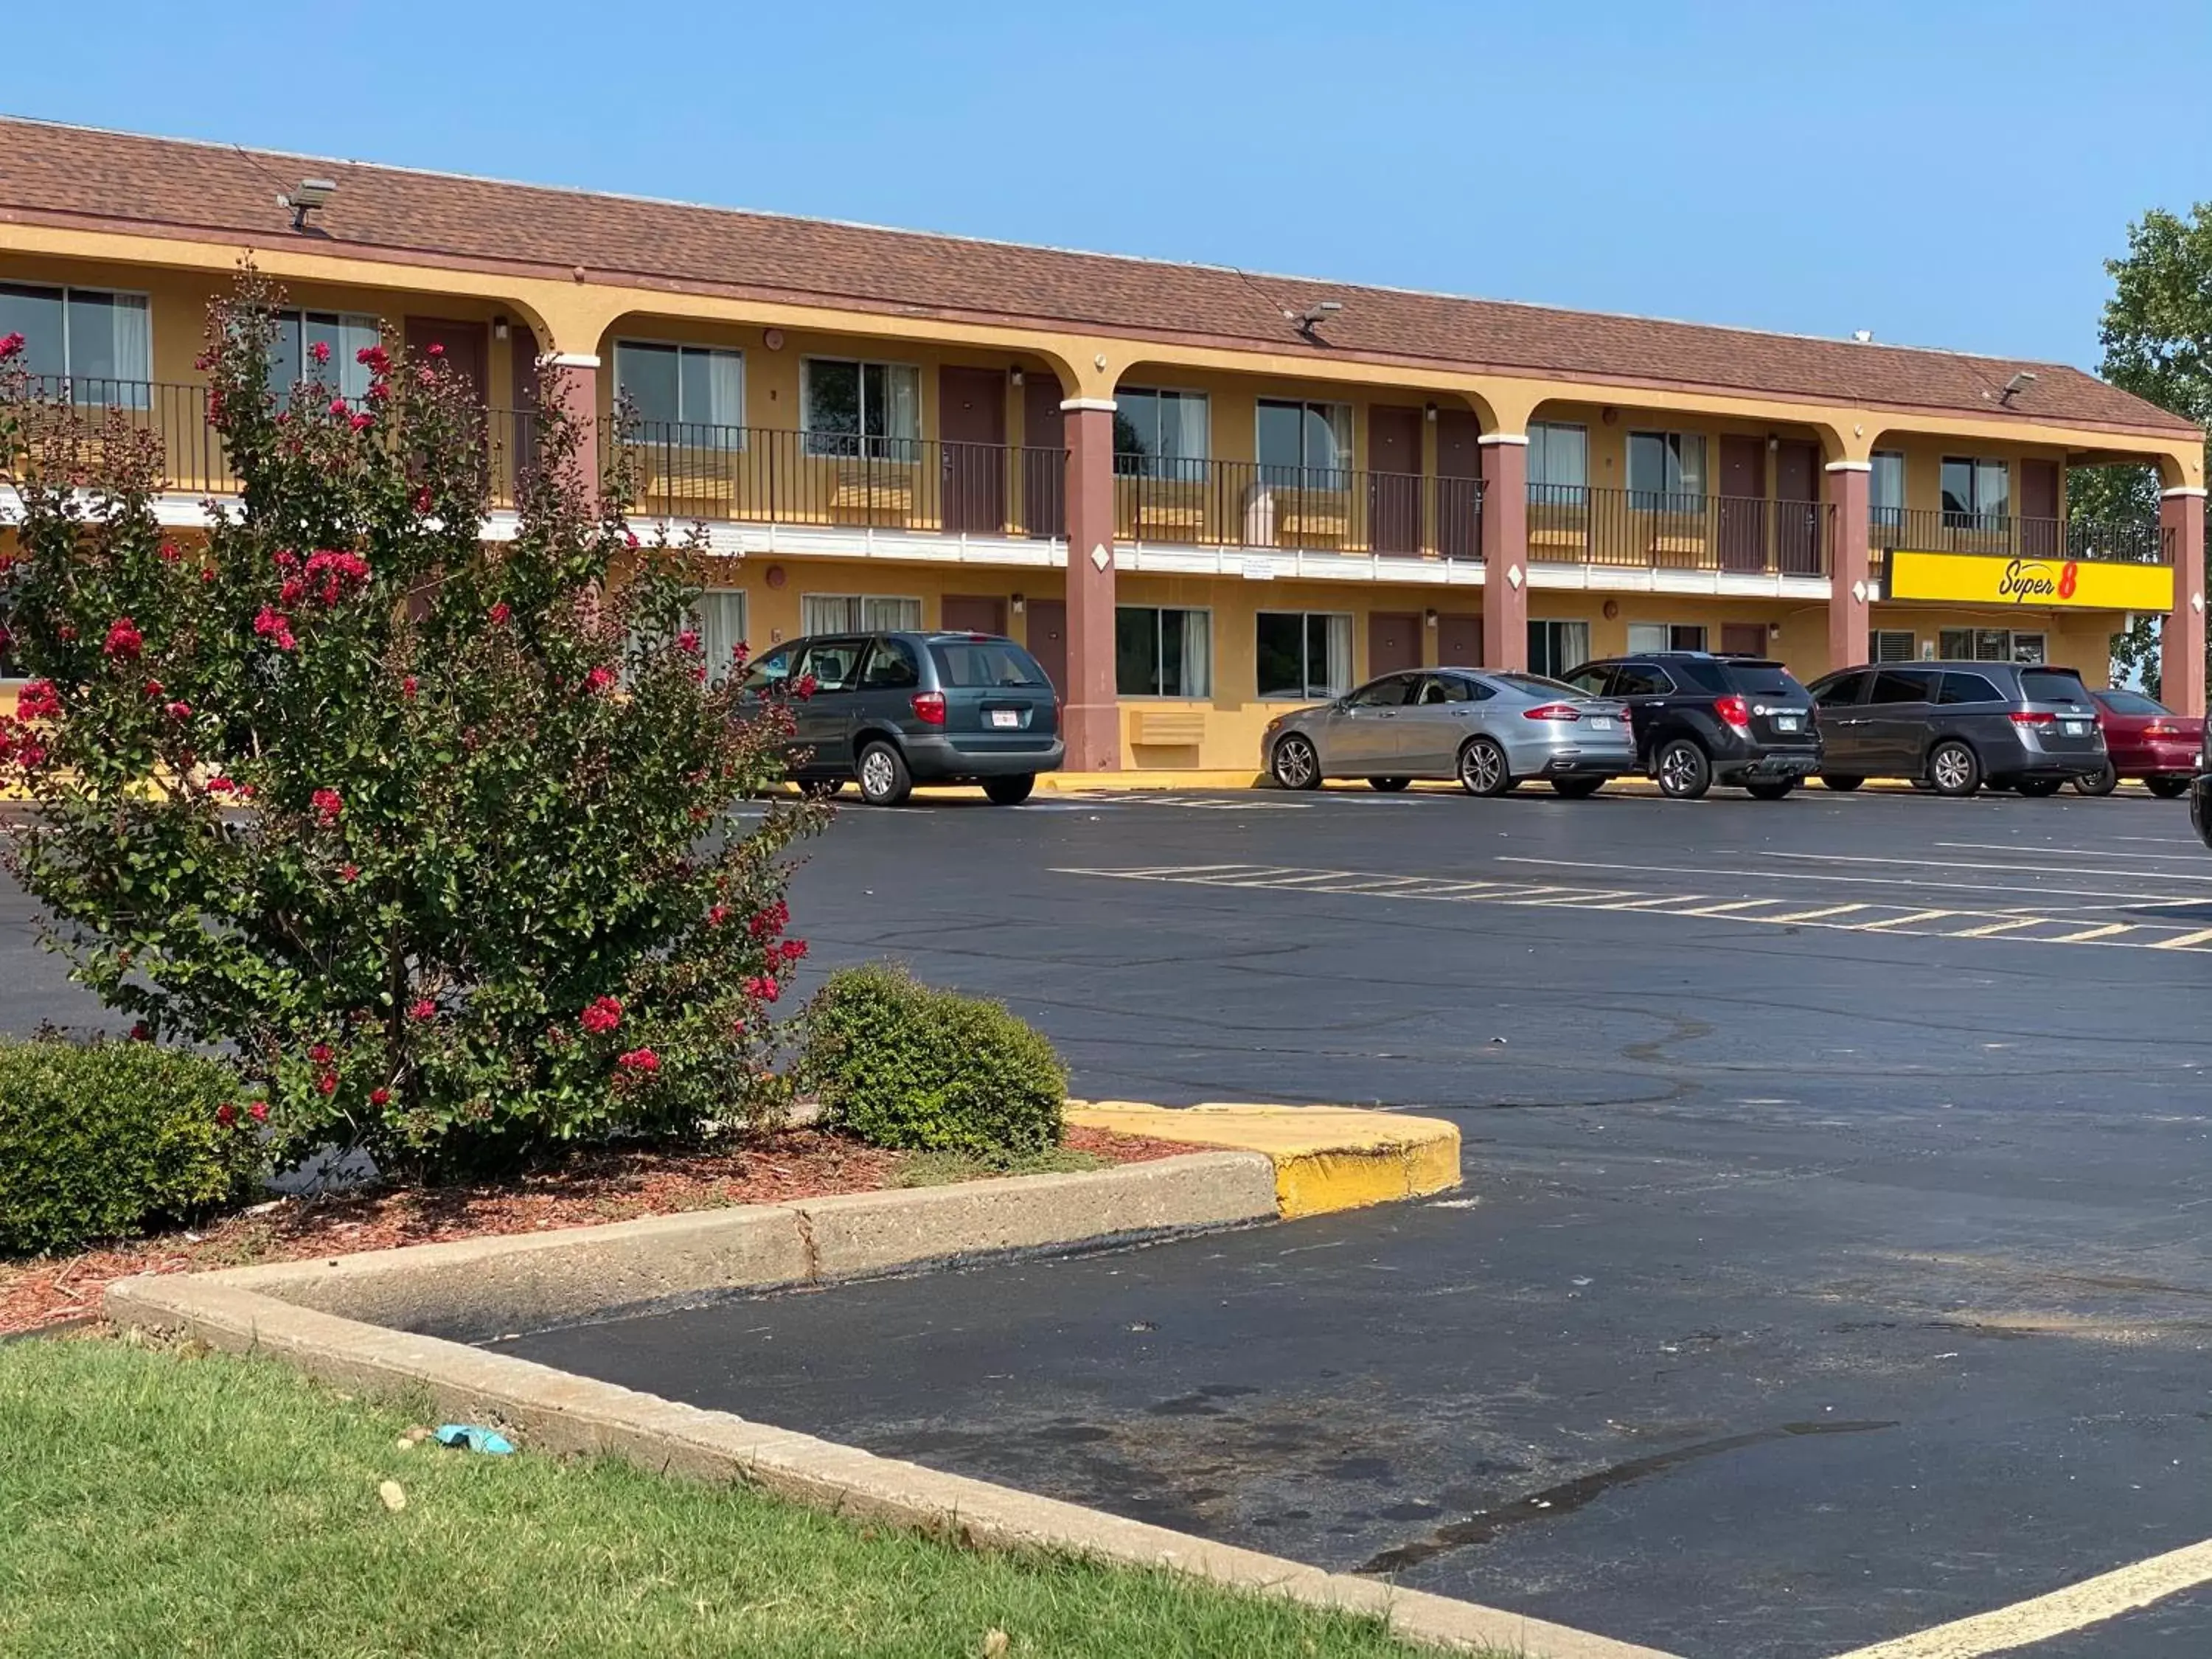 Property Building in Super 8 by Wyndham Midwest City OK